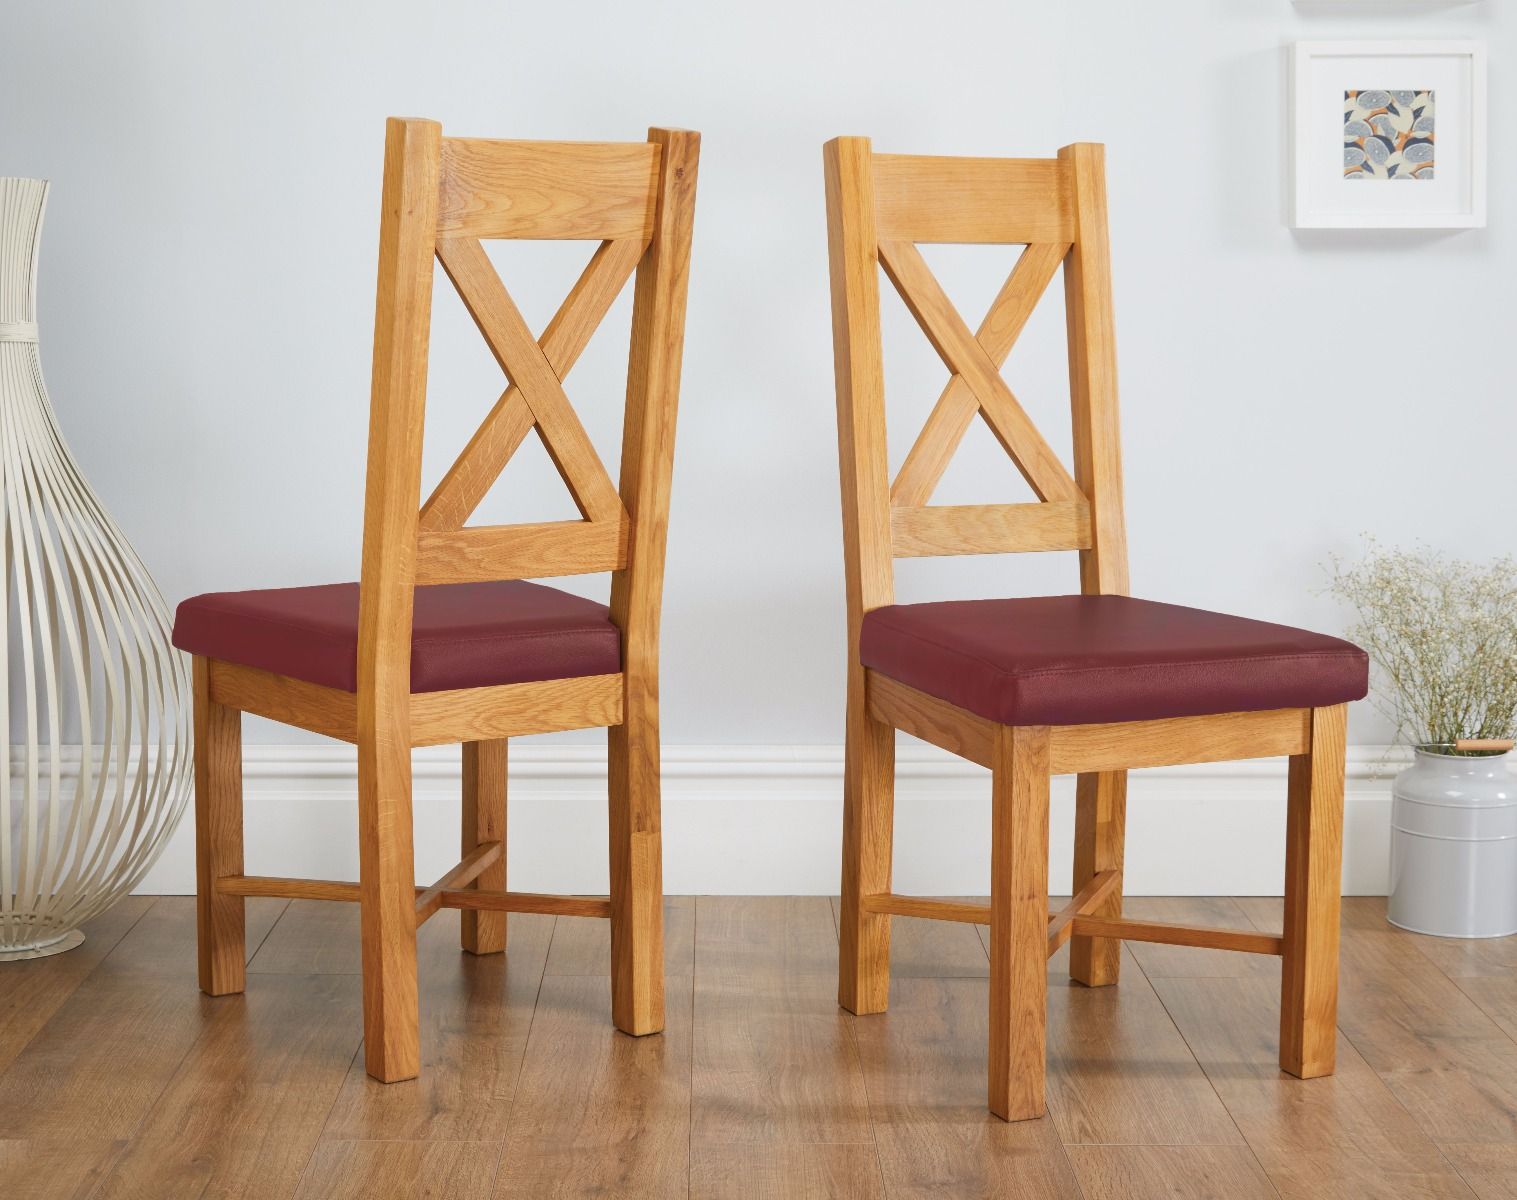 Grasmere Oak Chair with Red Leather Seat - WINTER SALE